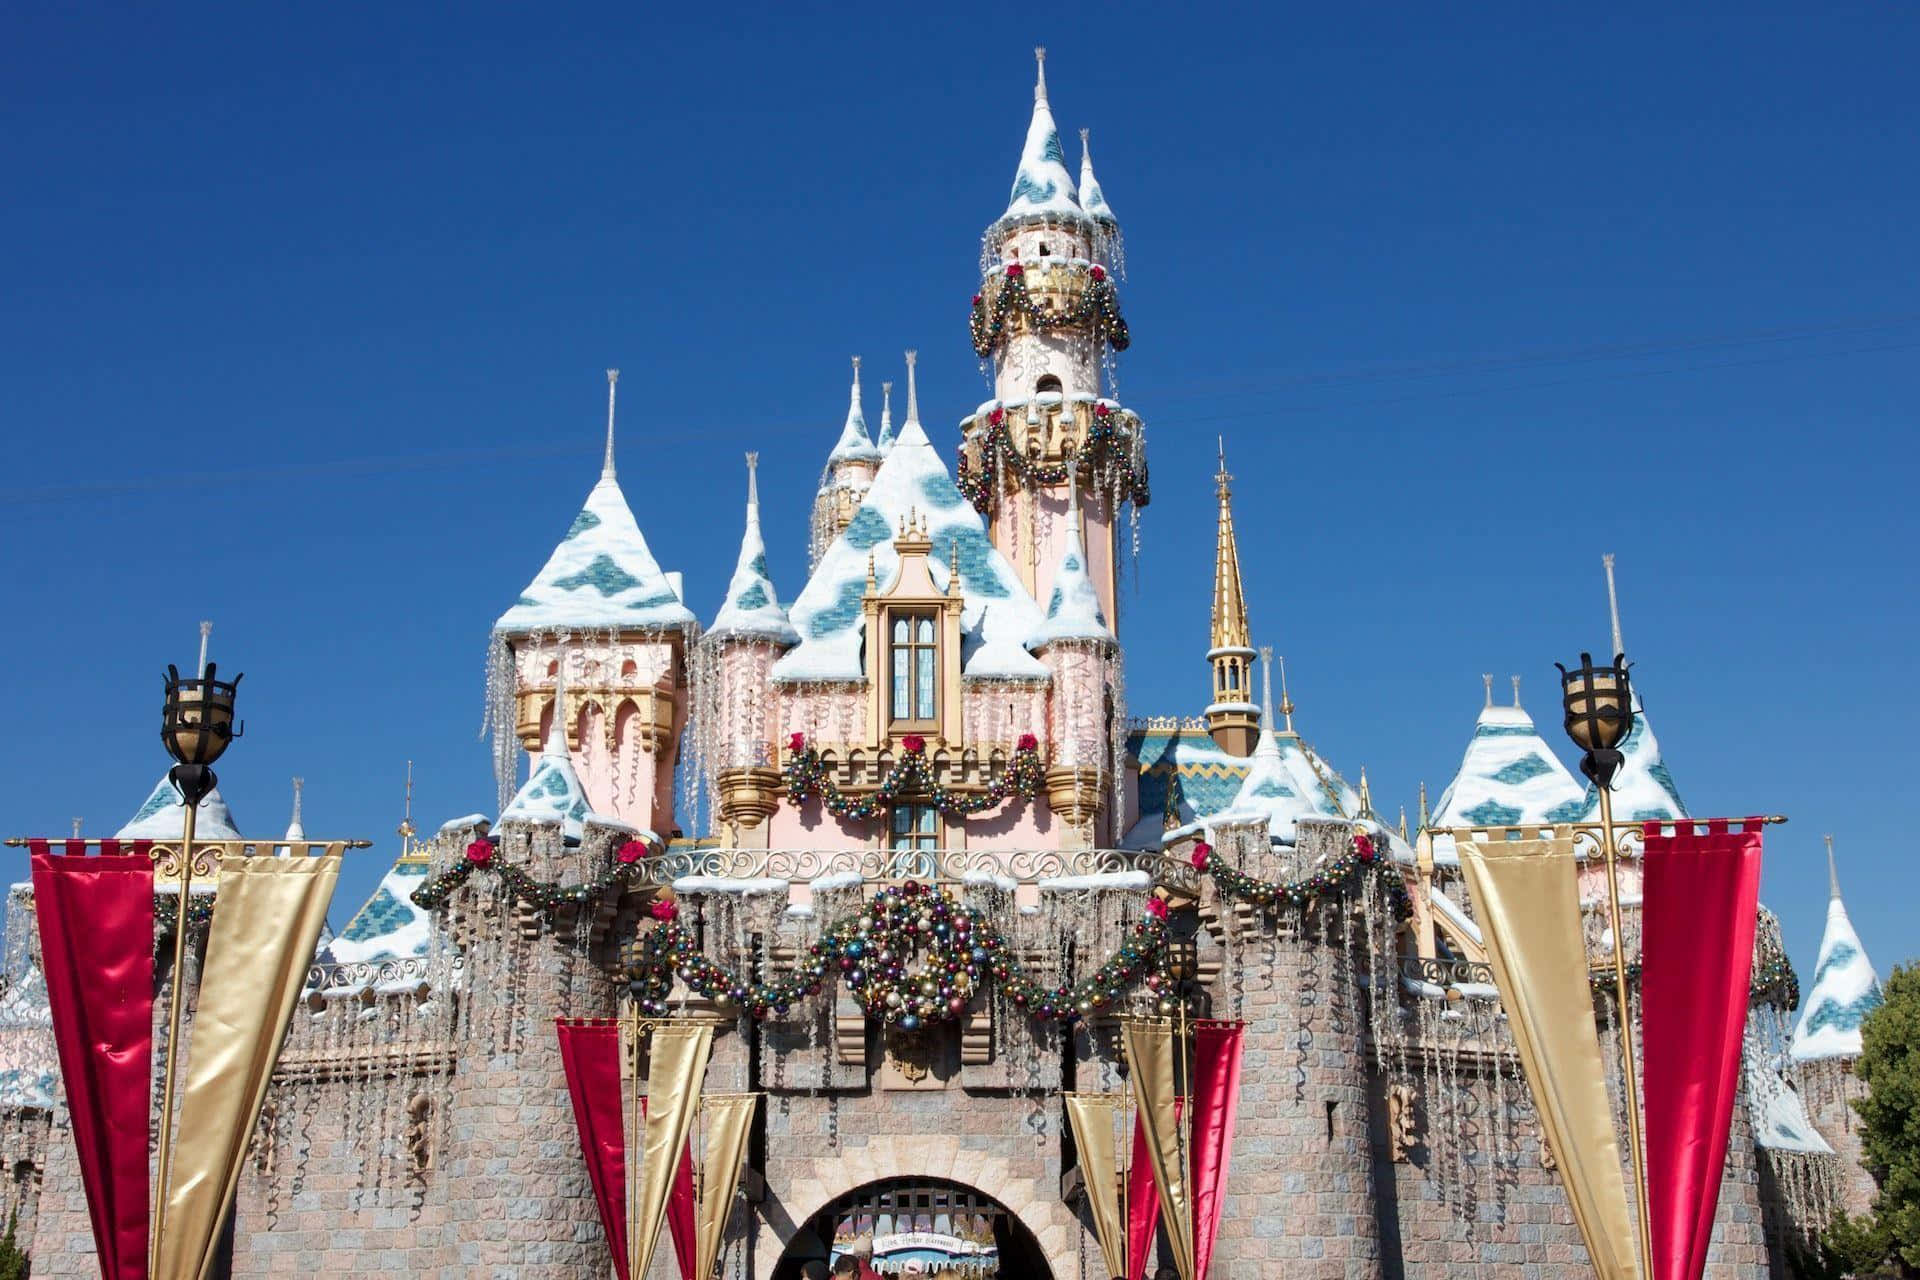 Come explore the wonder and excitement of Disneyland!